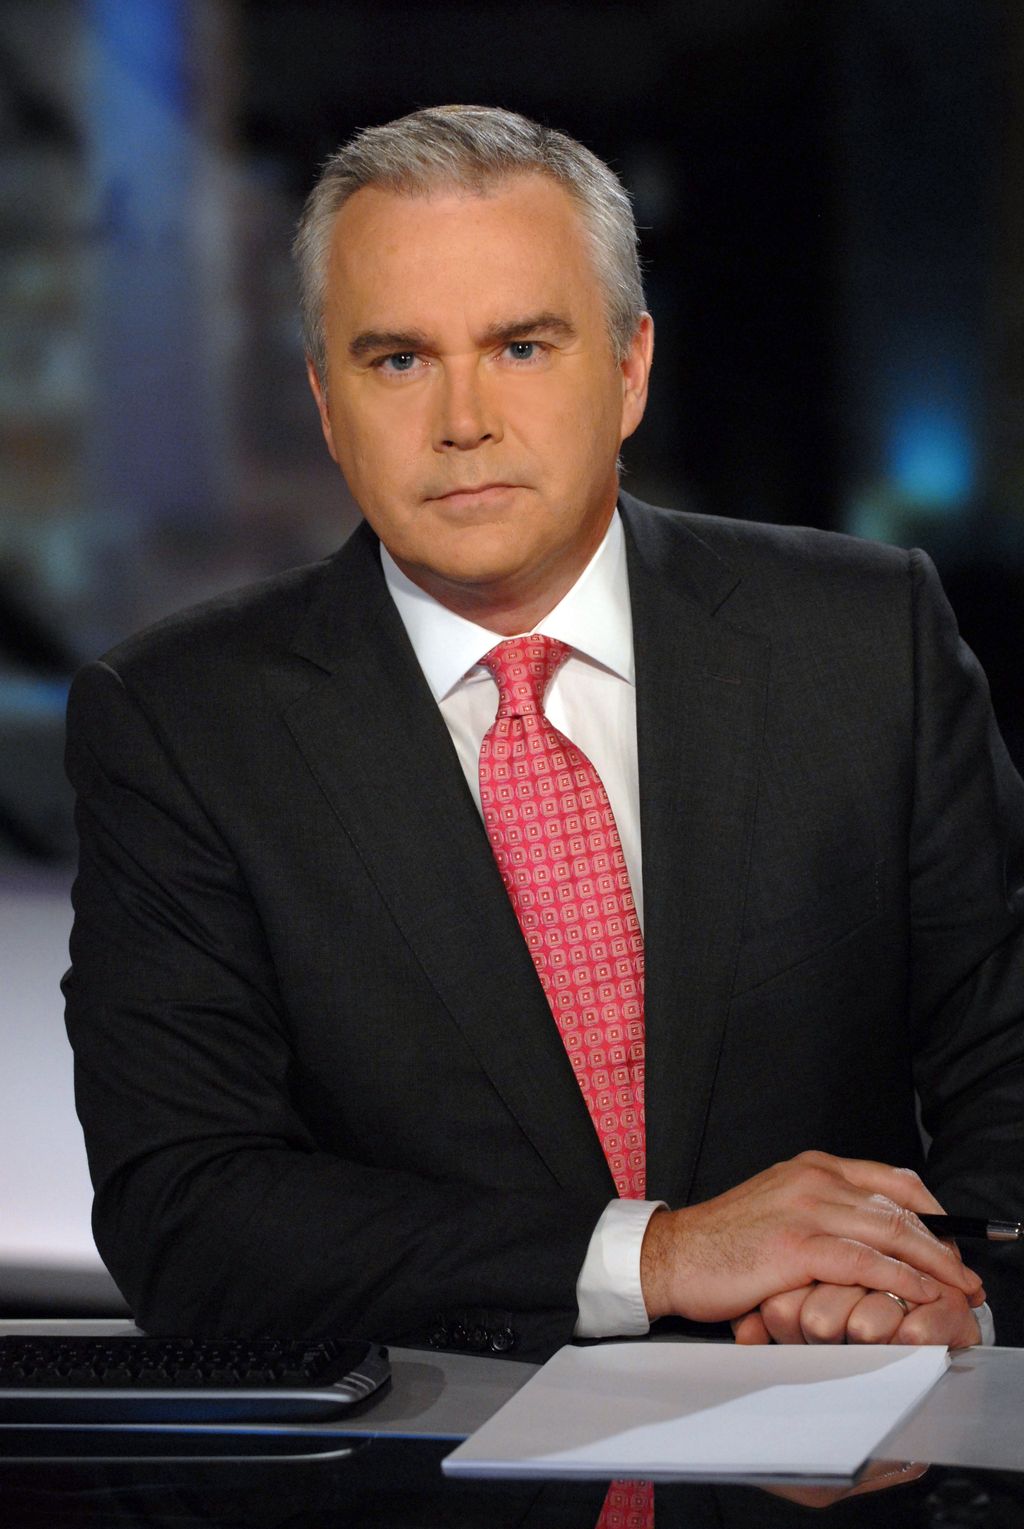 Huw Edwards Confirmed As Bbc Presenter At Centre Of Explicit Pictures